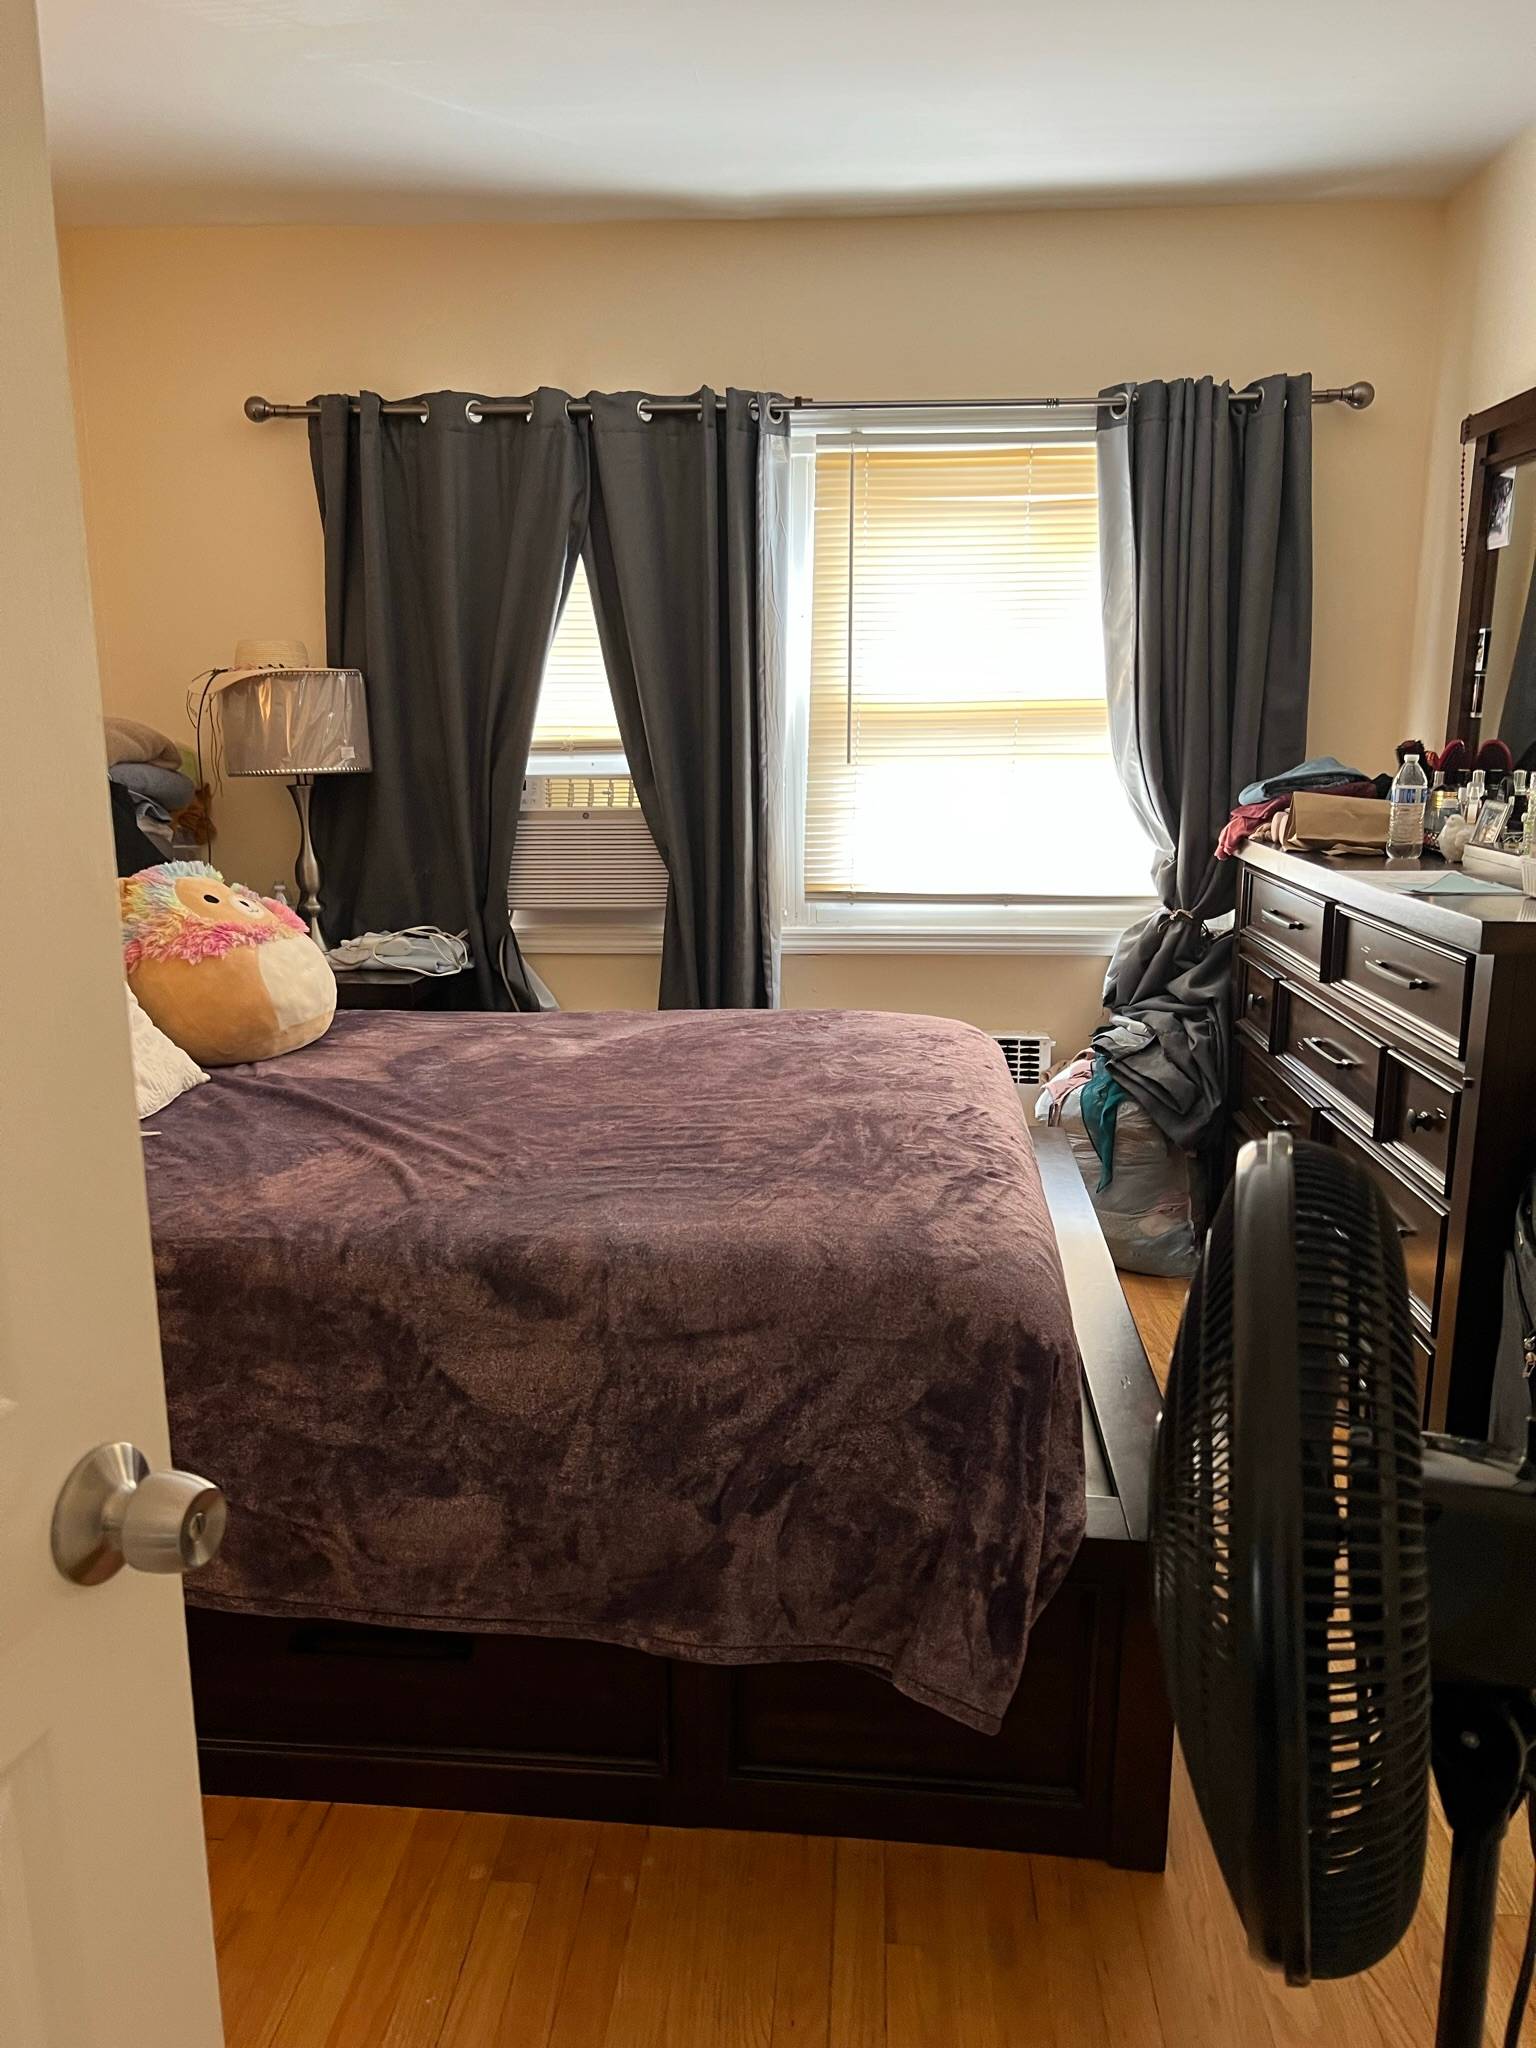 Prime Ozone Park Queens EXCLUSIVE Totally Newly renovated legal 5 family FOR SALE Free market rental income producer with current 7 CAP rate fully occupied !